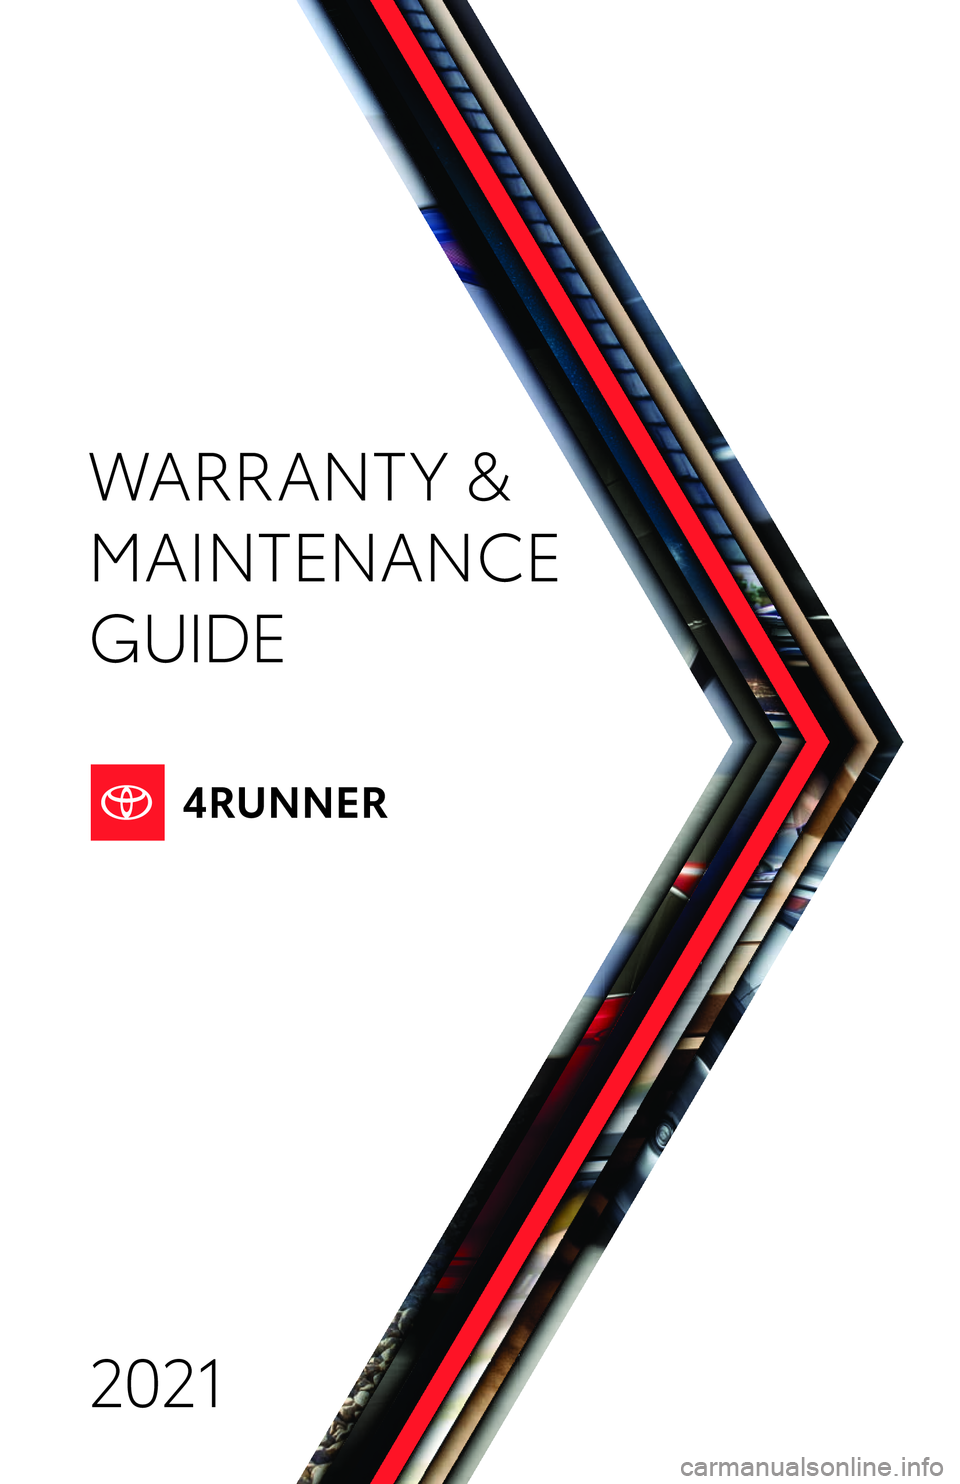 TOYOTA 4RUNNER 2021  Warranties & Maintenance Guides (in English) 2021 WARRANT Y &
MAINTENANCE 
GUIDE
19-TCS-14198 MY21 WMG 4RUNNER COVER.indd 27/30/20 4:57 PM 